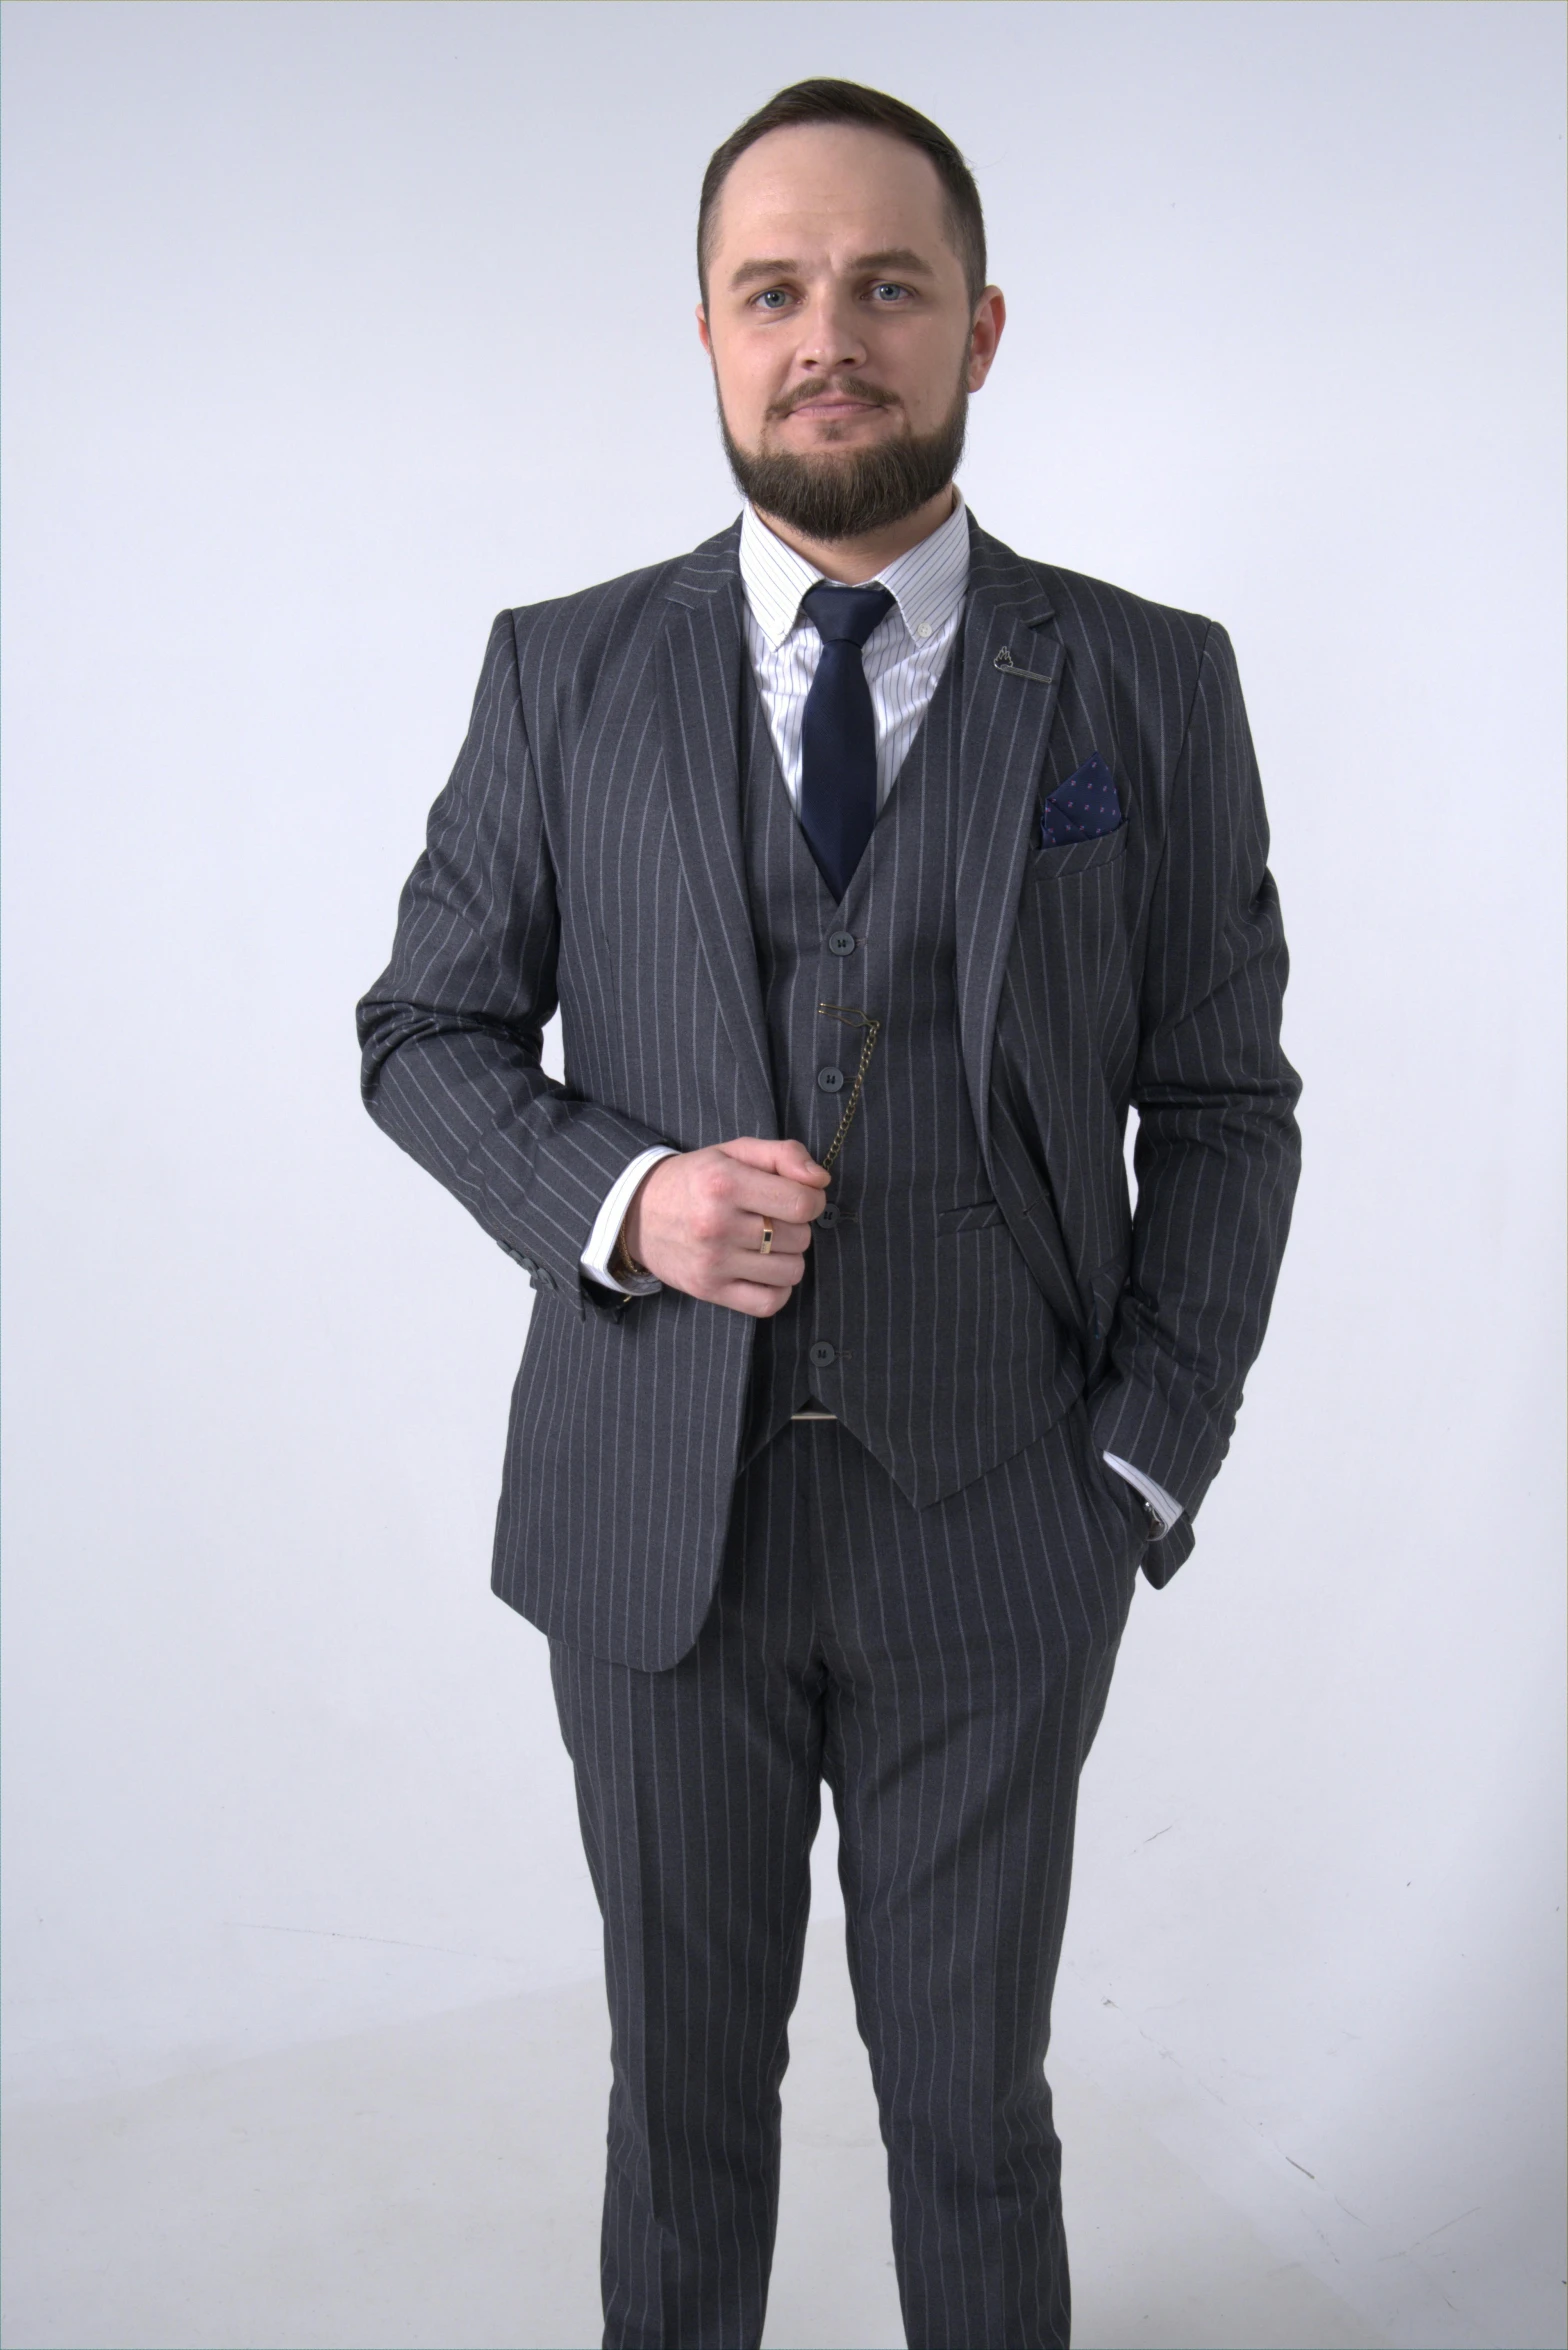 a man in a business suit, with beard